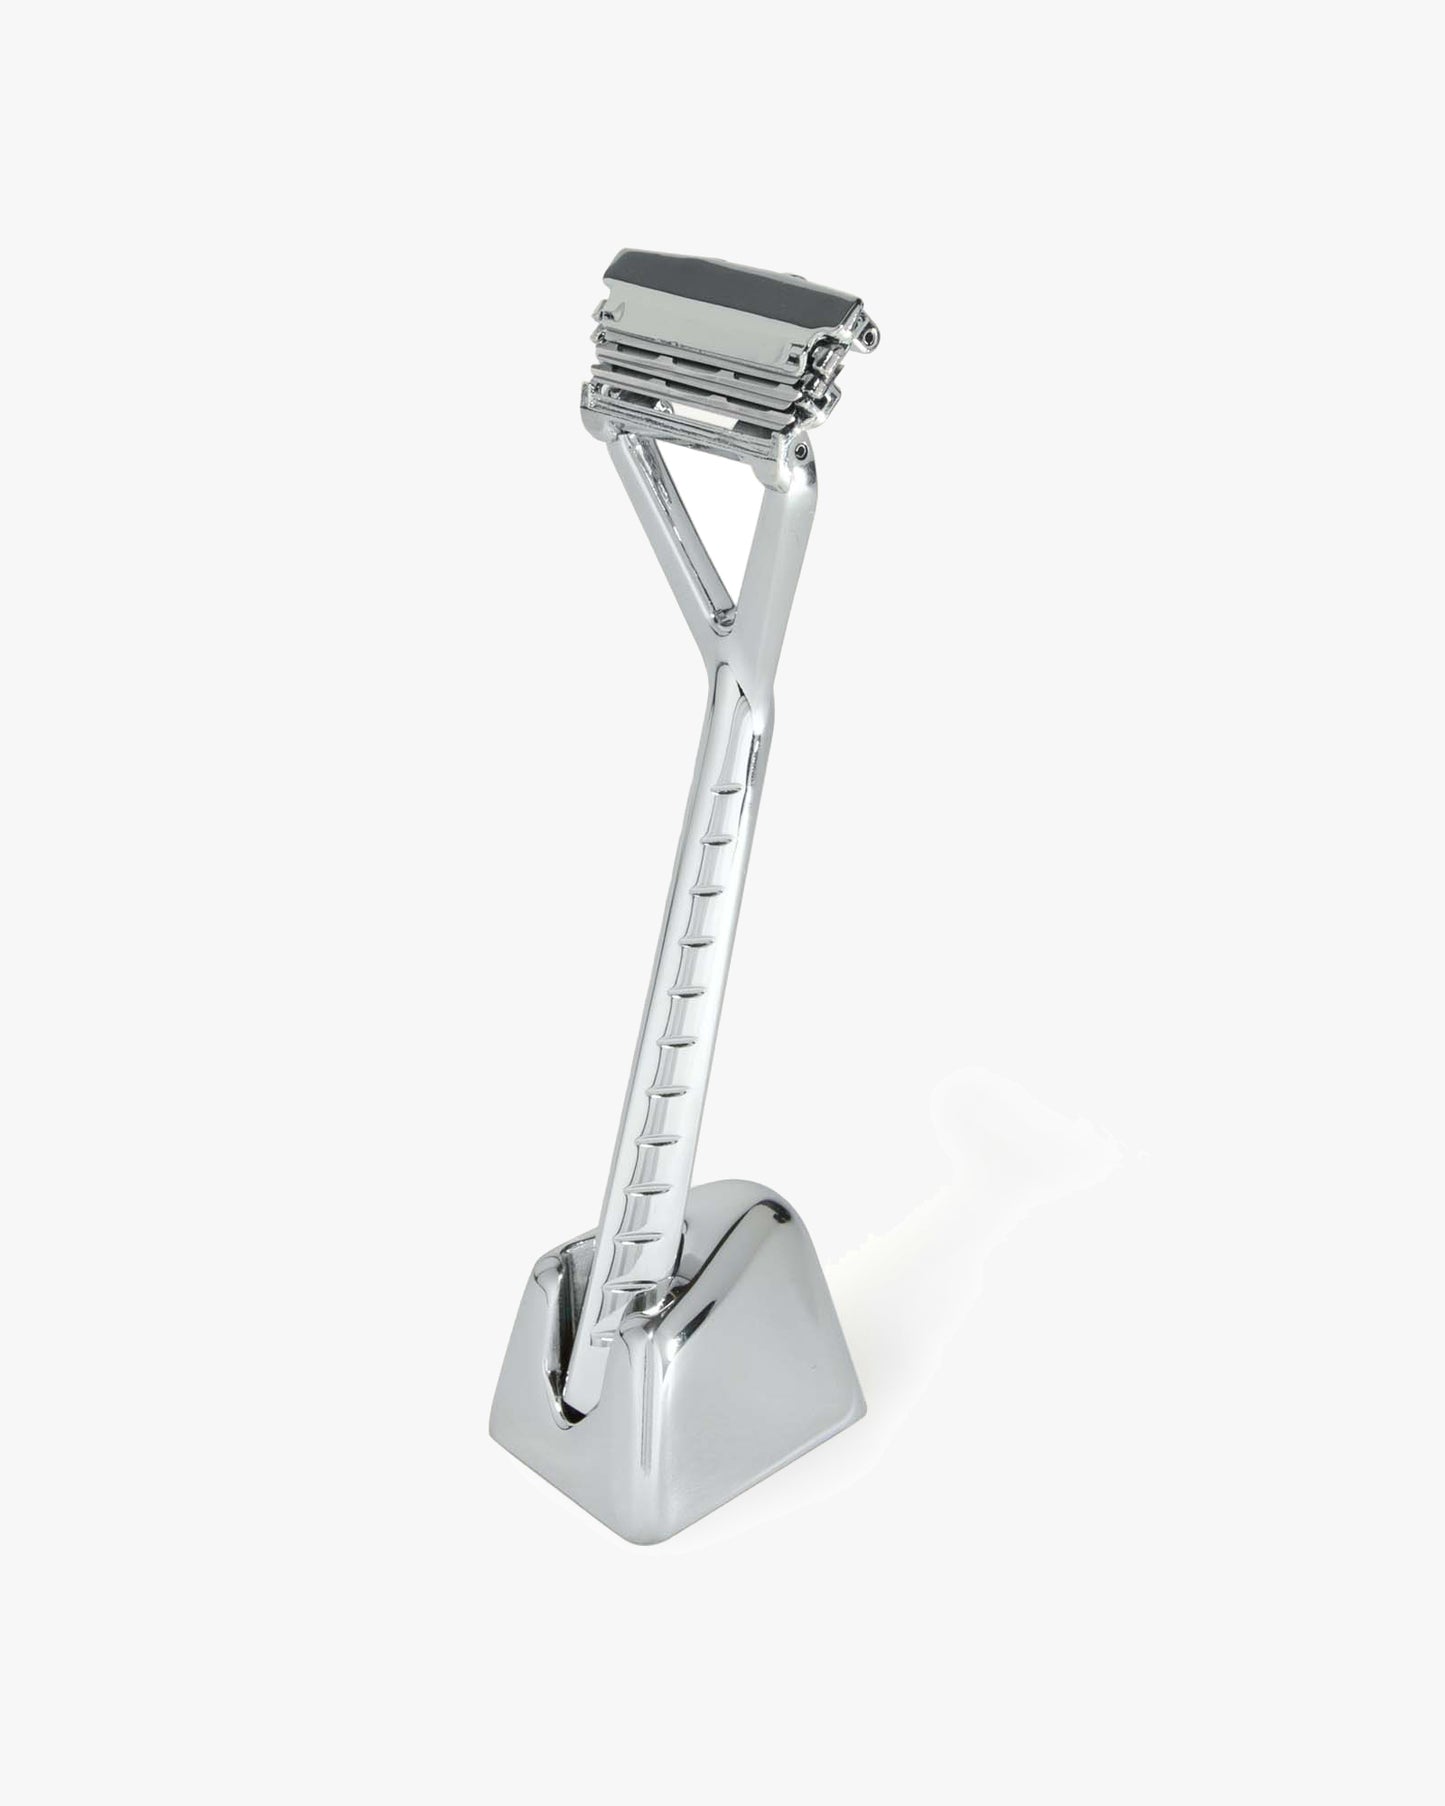 The Leaf Stand for Leaf Razors